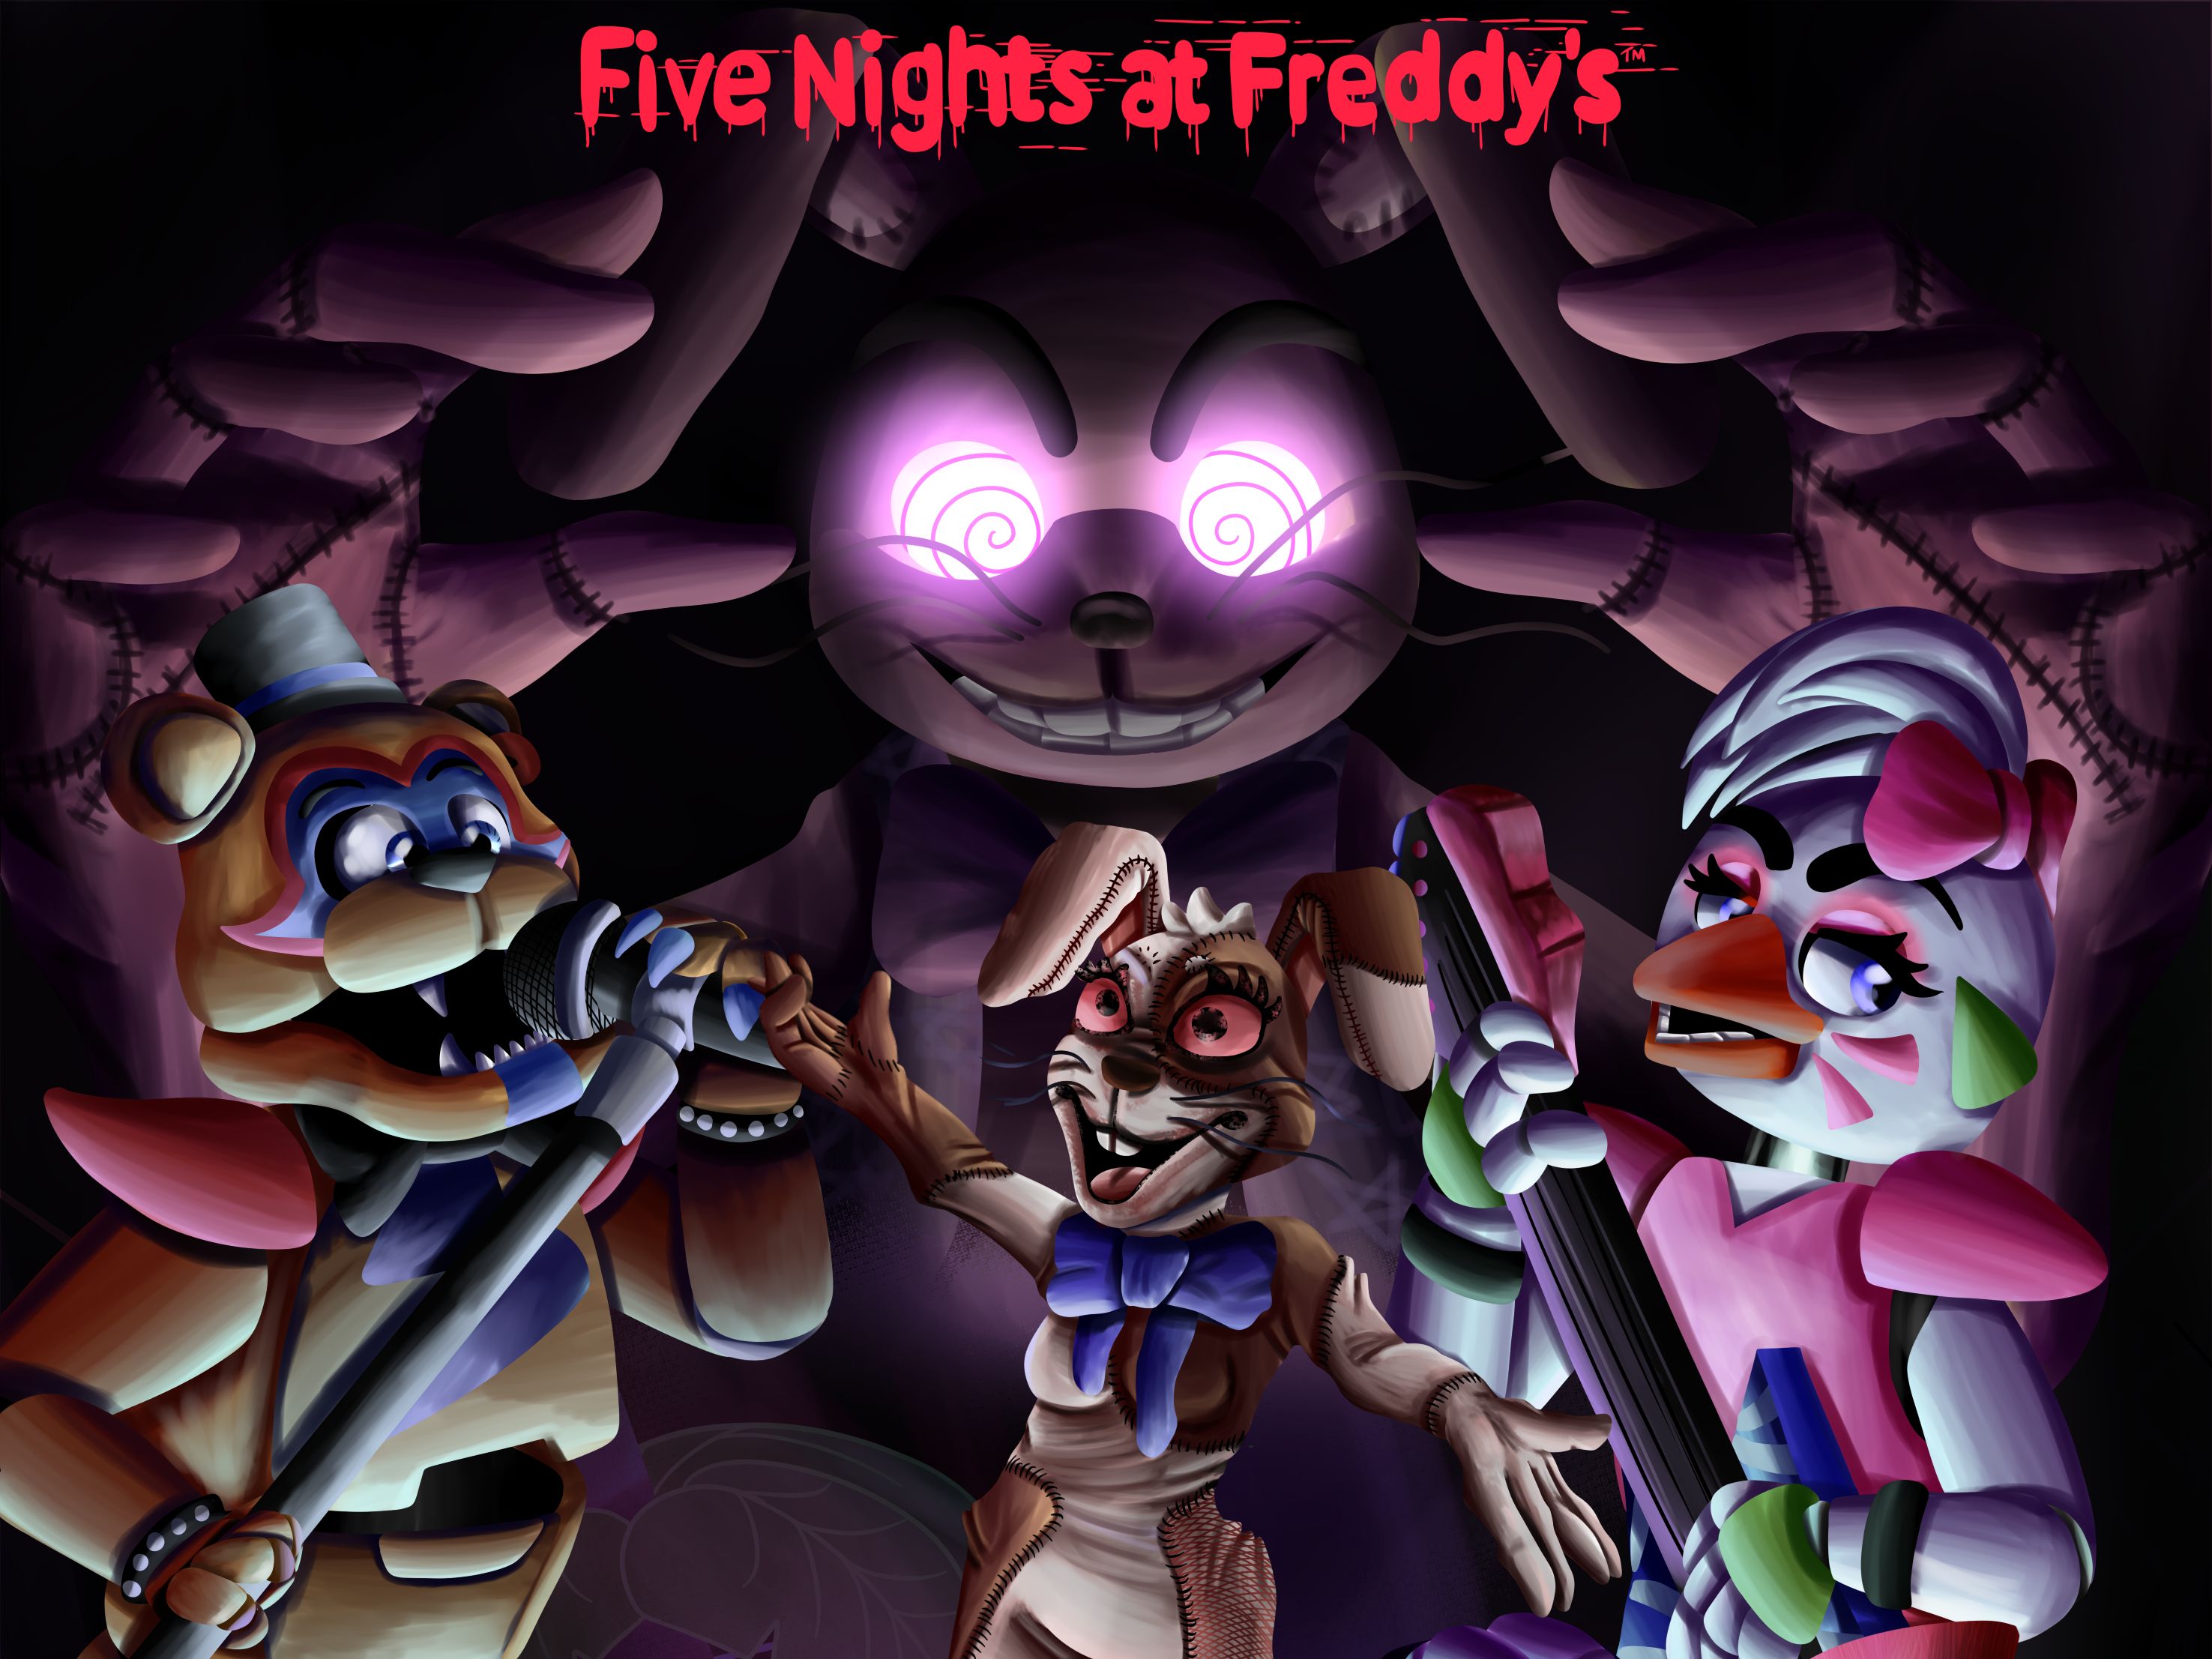 five nights at freddy's: security breach, video game, five nights at freddy's